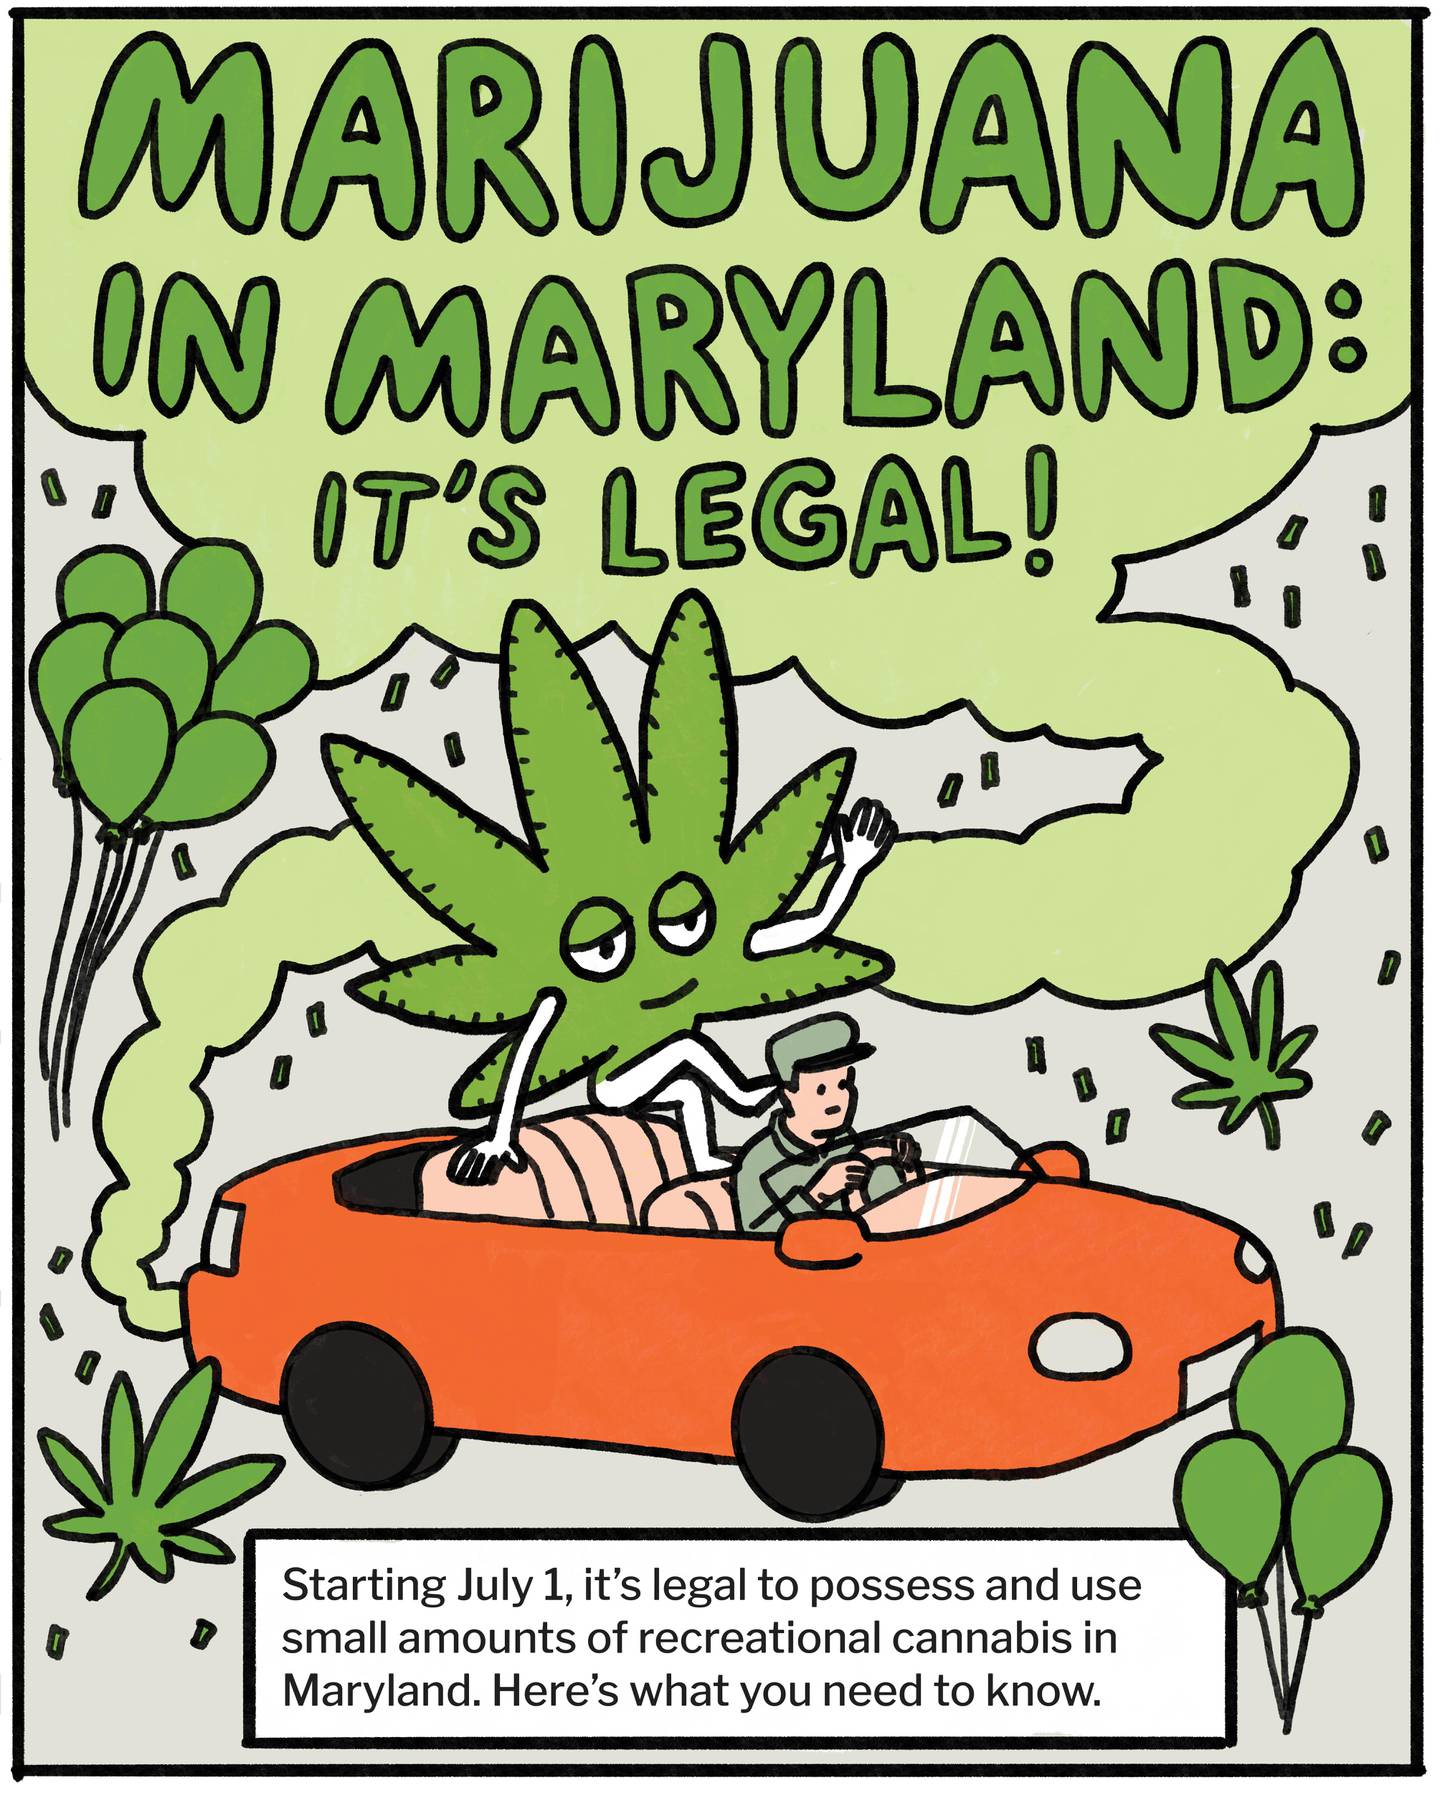 Marijuana in Maryland: It’s legal! Starting July 1, it’s legal to possess and use small amounts of recreational cannabis in Maryland. Here’s what you need to know.